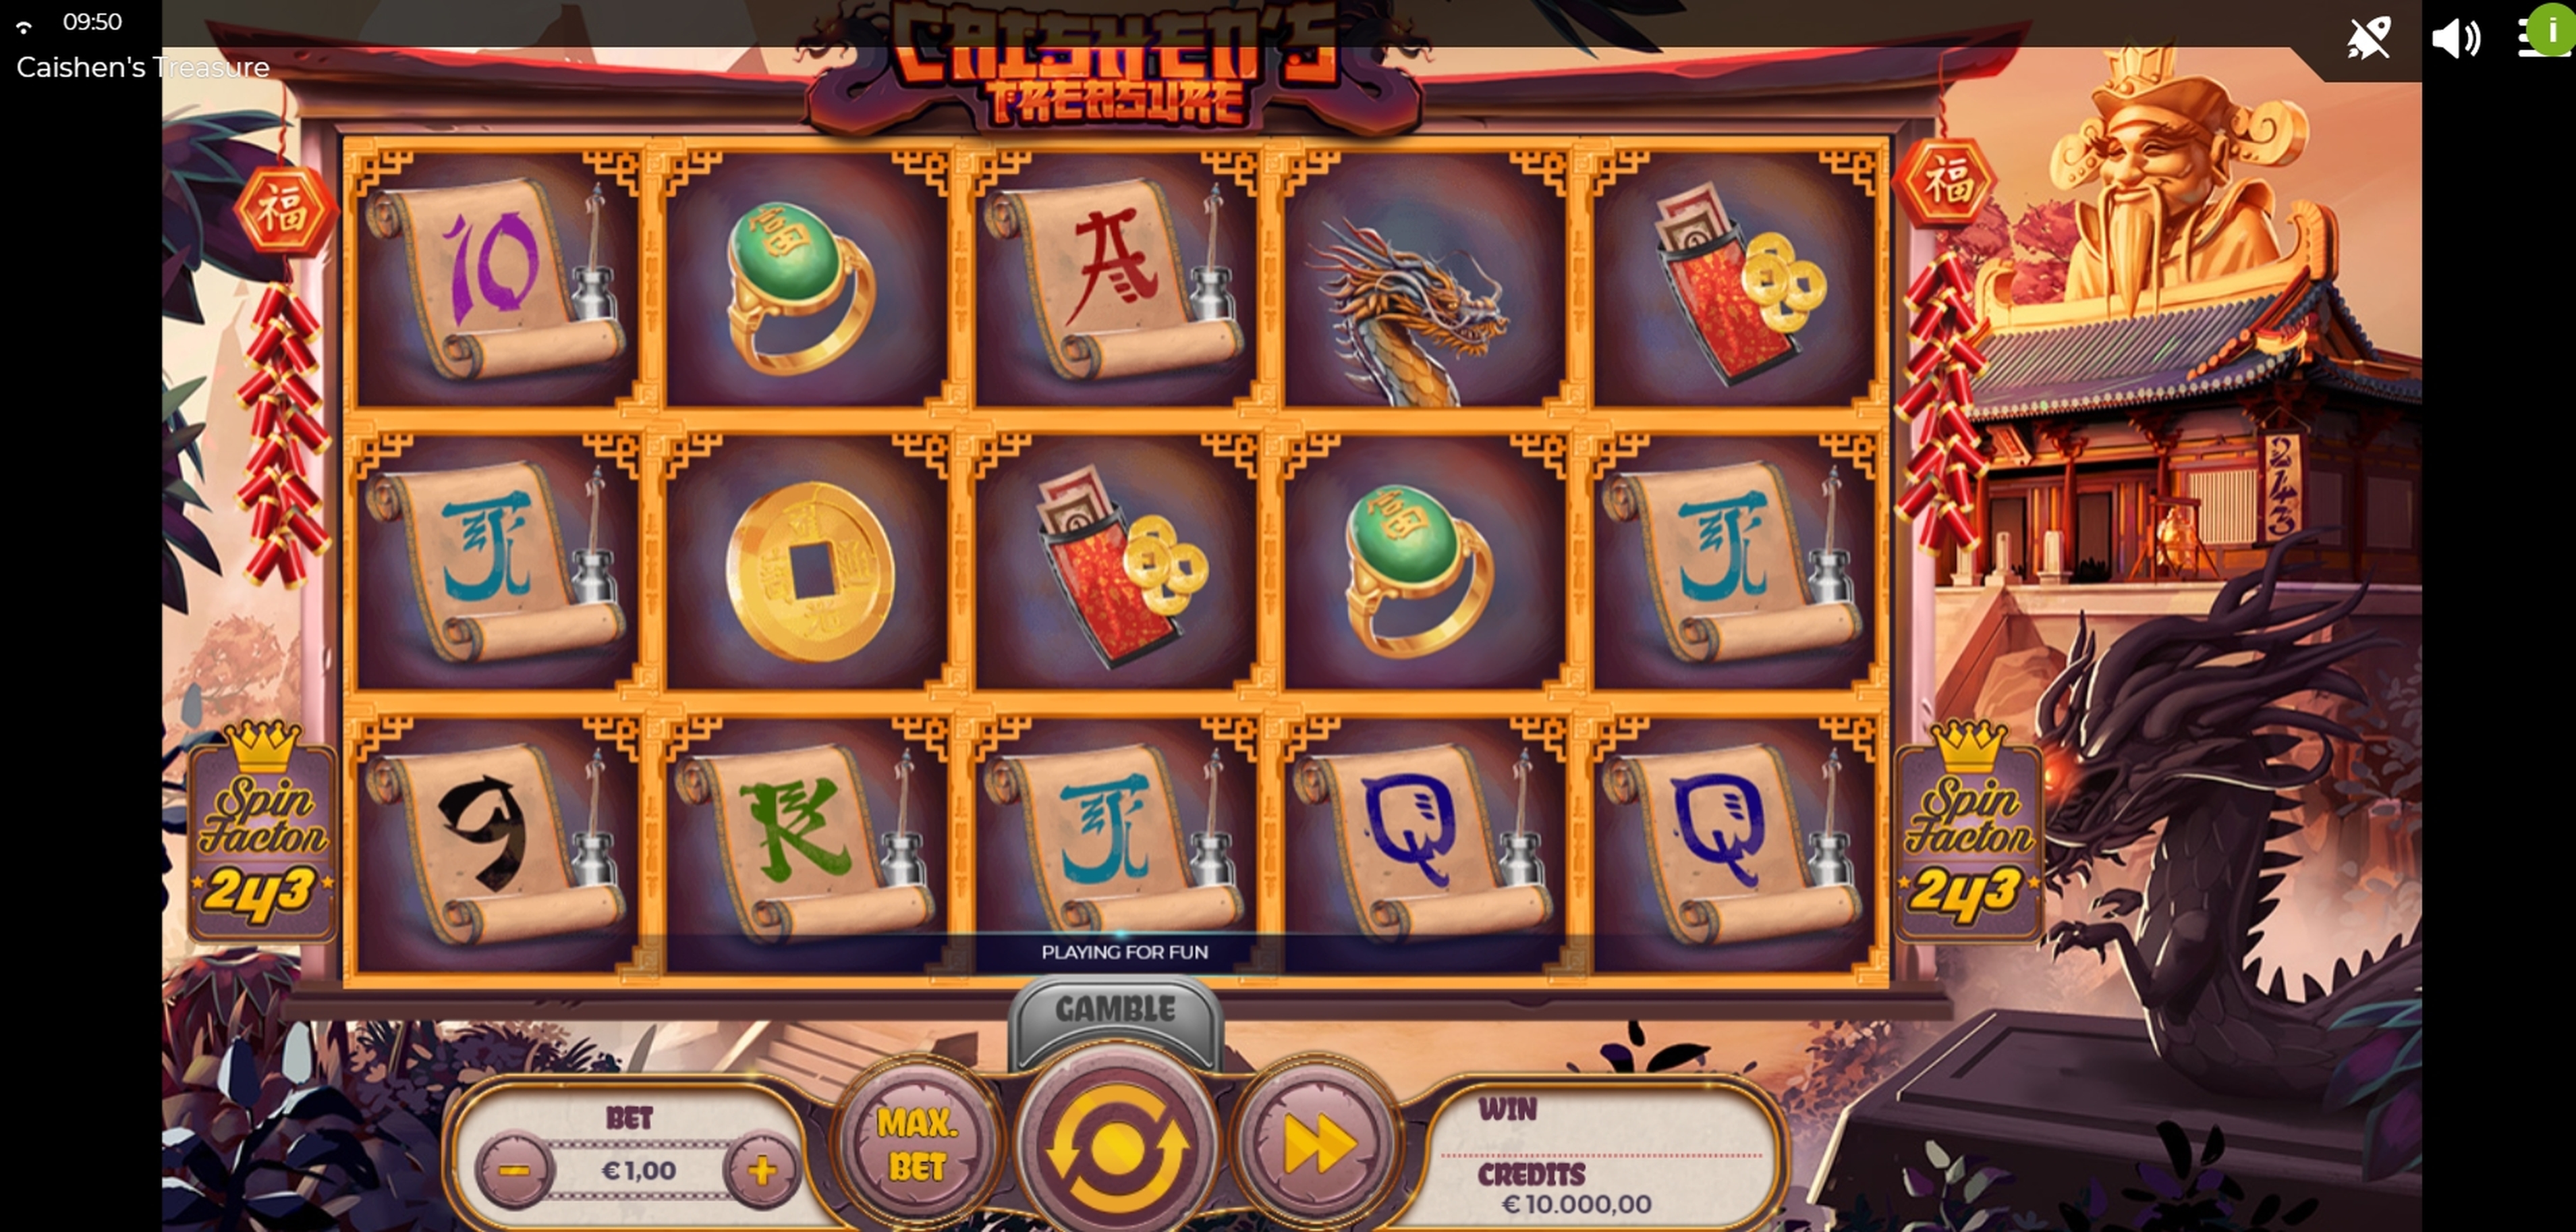 Reels in Caishen's Treasure Slot Game by Spinmatic